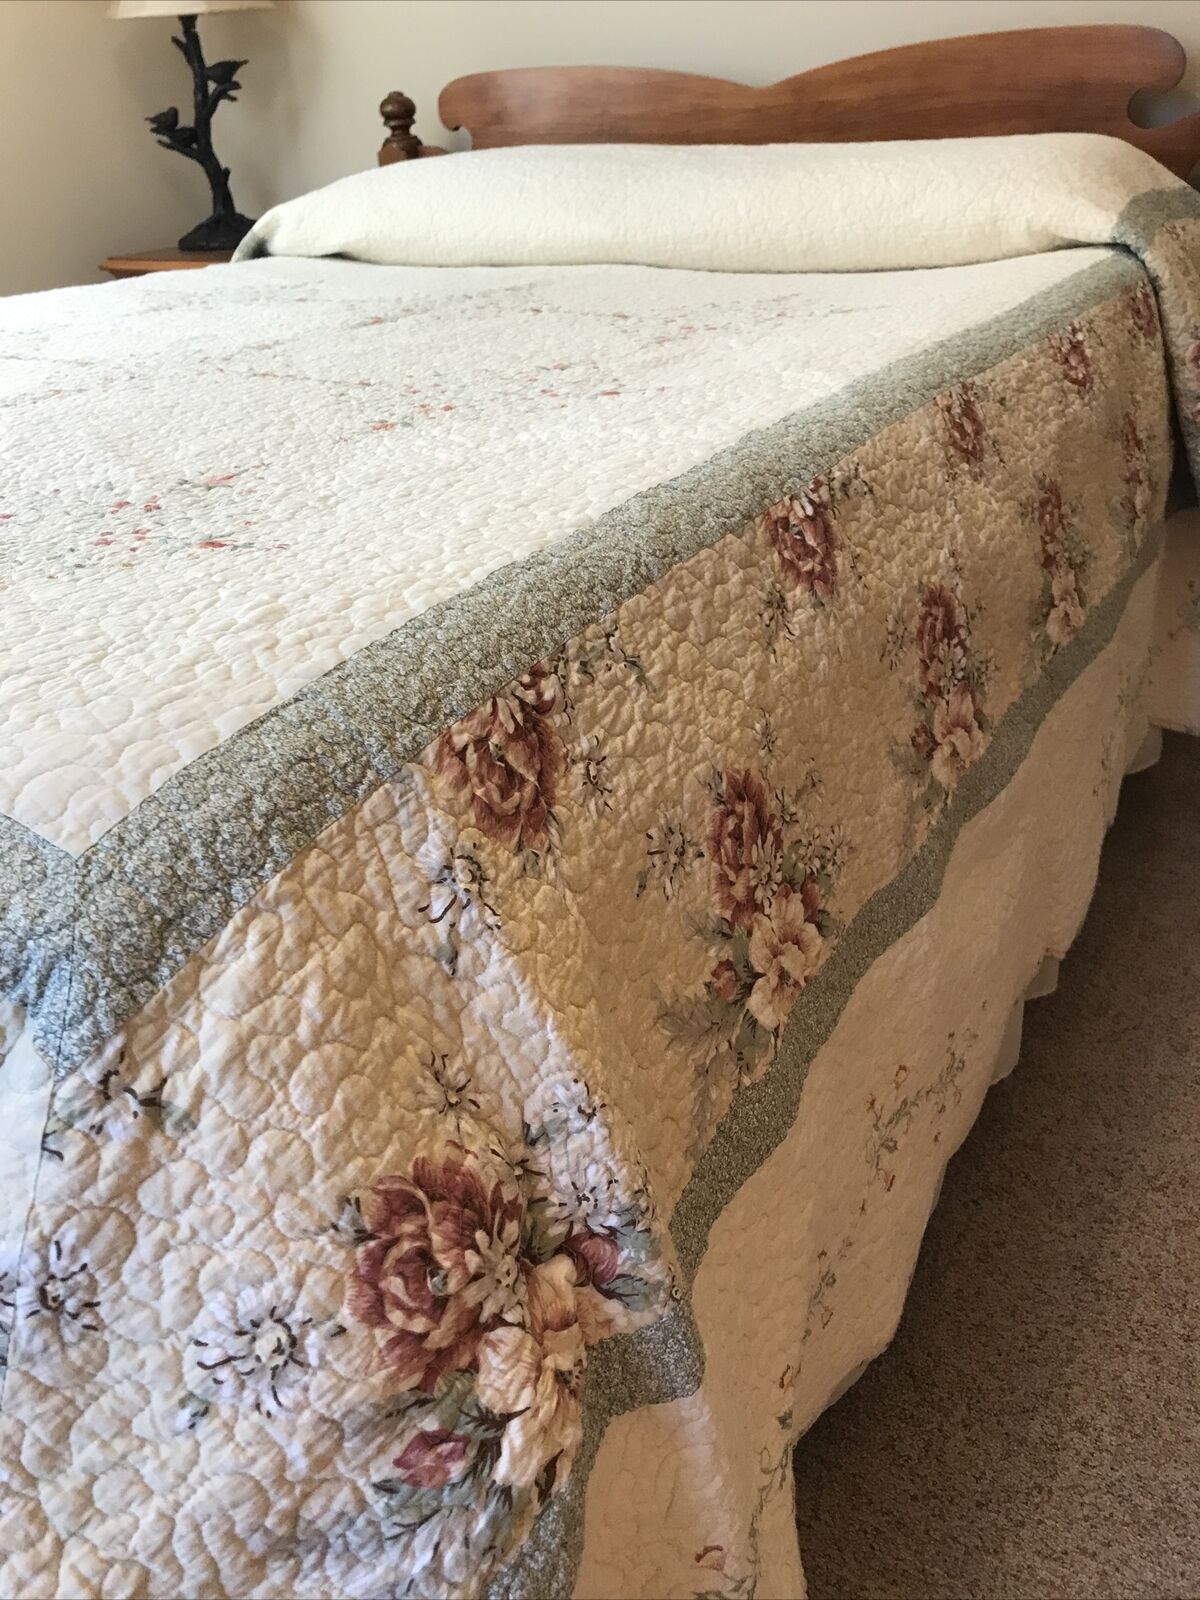 Vtg Full Queen Bedspread Quilt Chic Shabby Floral Embroidered, Pink Orange Green